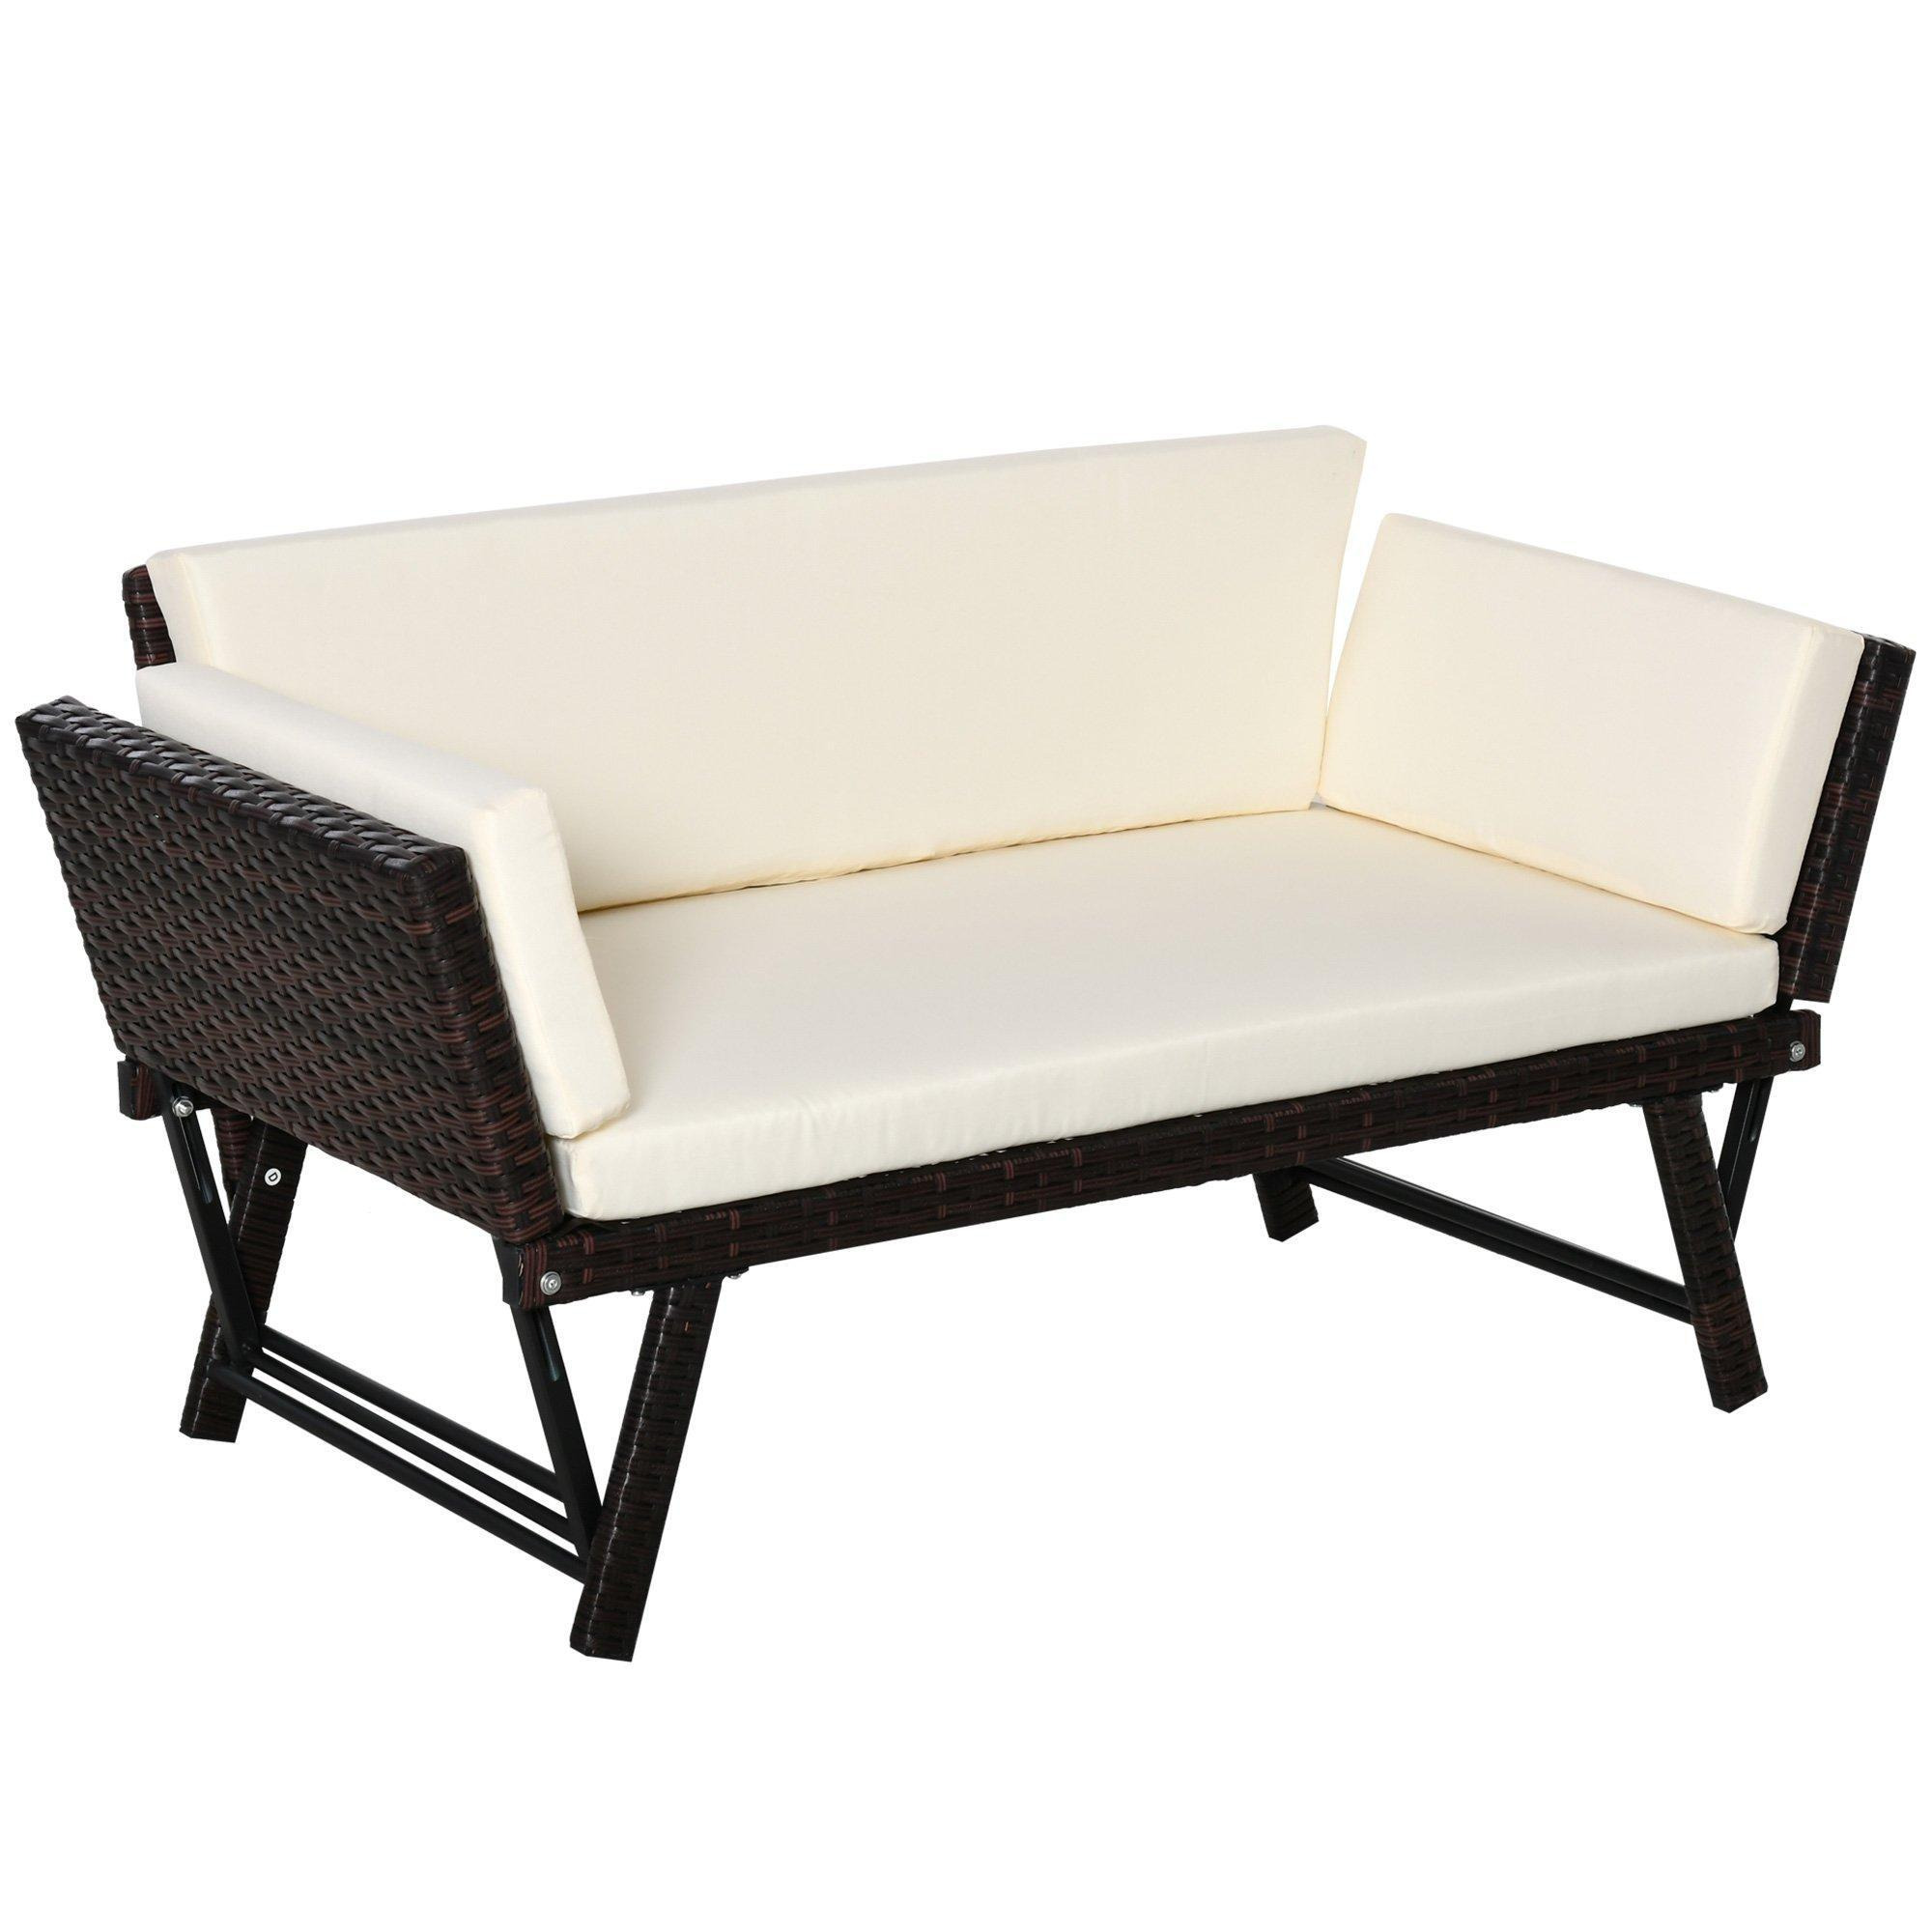 2 in 1 Rattan Folding Daybed Sofa Bench Garden Chaise Lounger withCushion - image 1